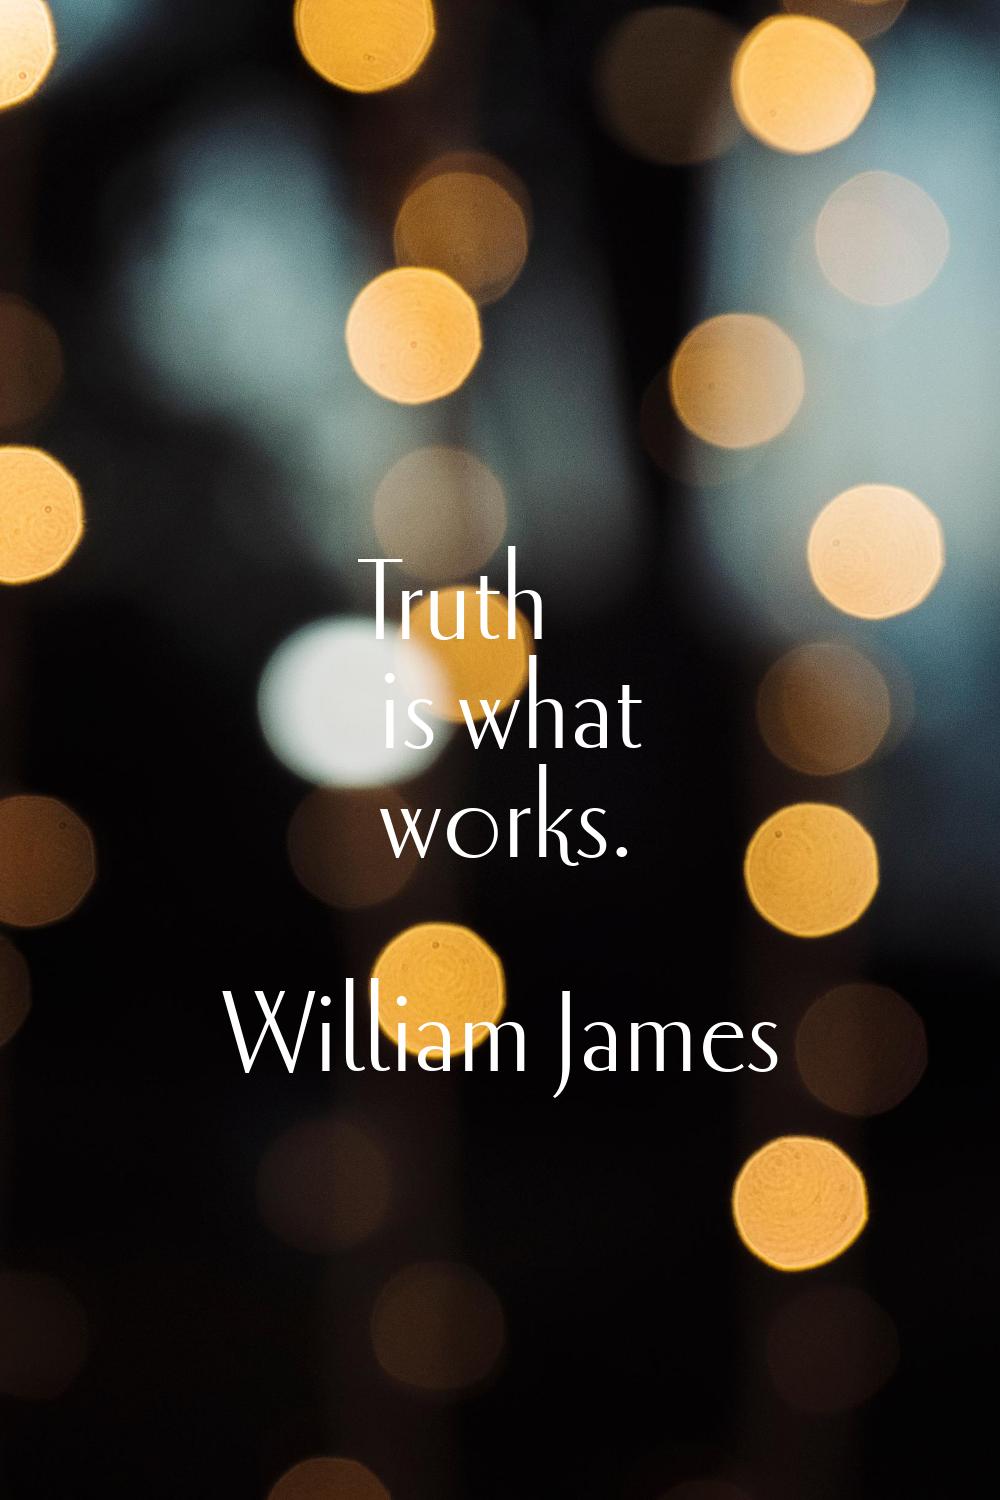 Truth is what works.